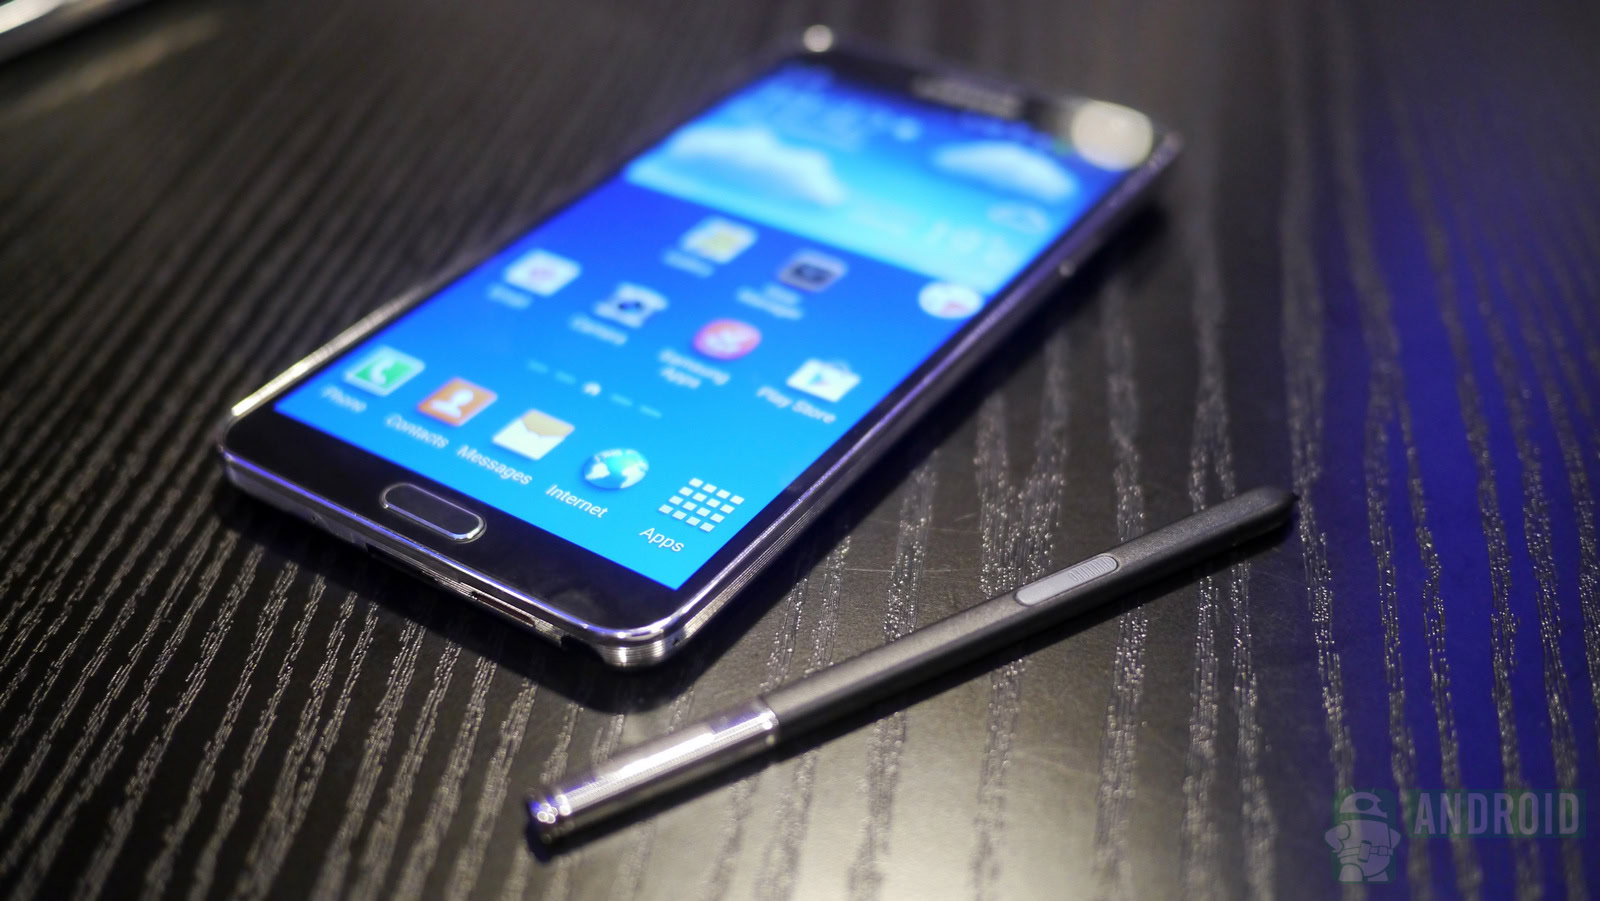 Samsung Galaxy Note 3 with S pen. 